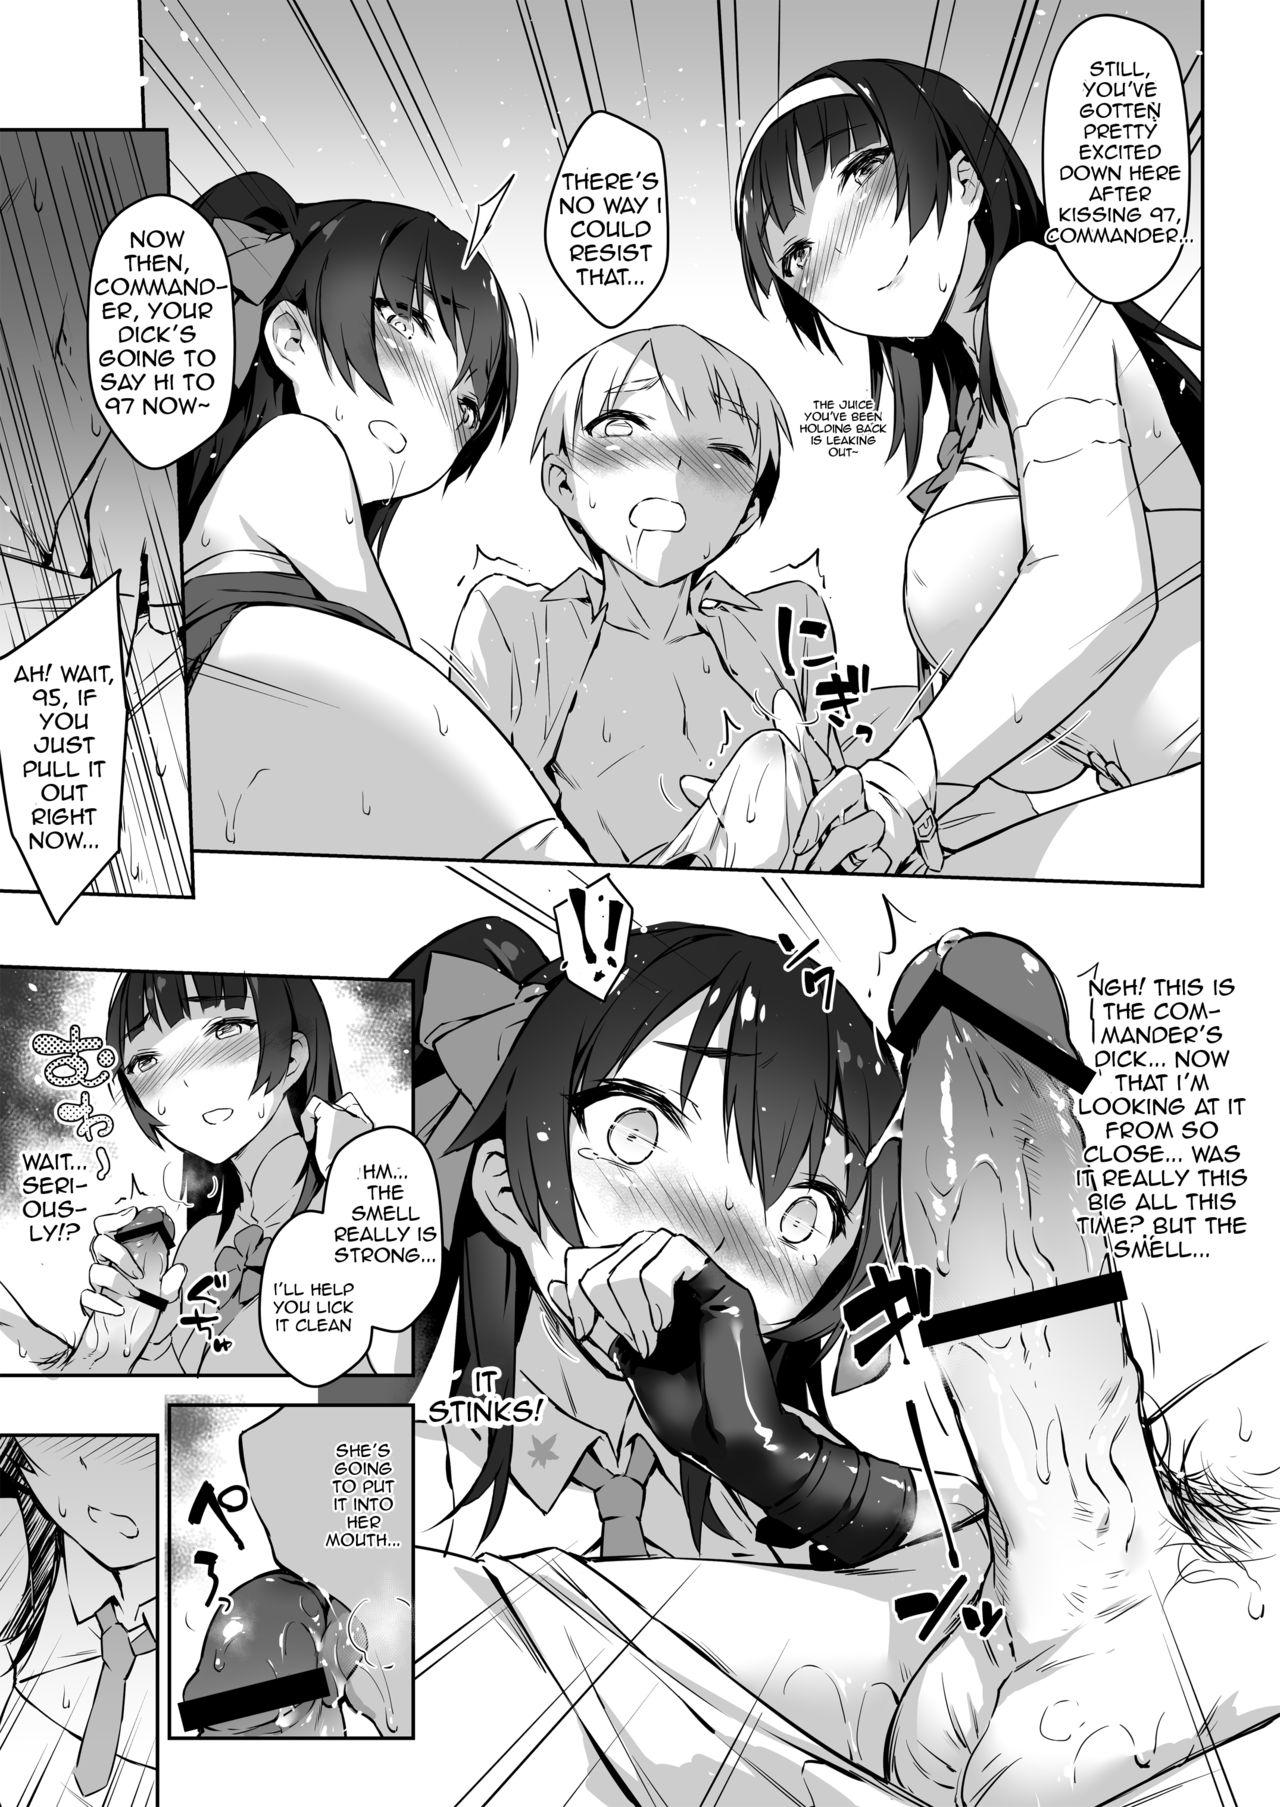 Best Blowjob Type 95 Type 97, Let Your Big Sister Teach You! - Girls frontline Duro - Page 11